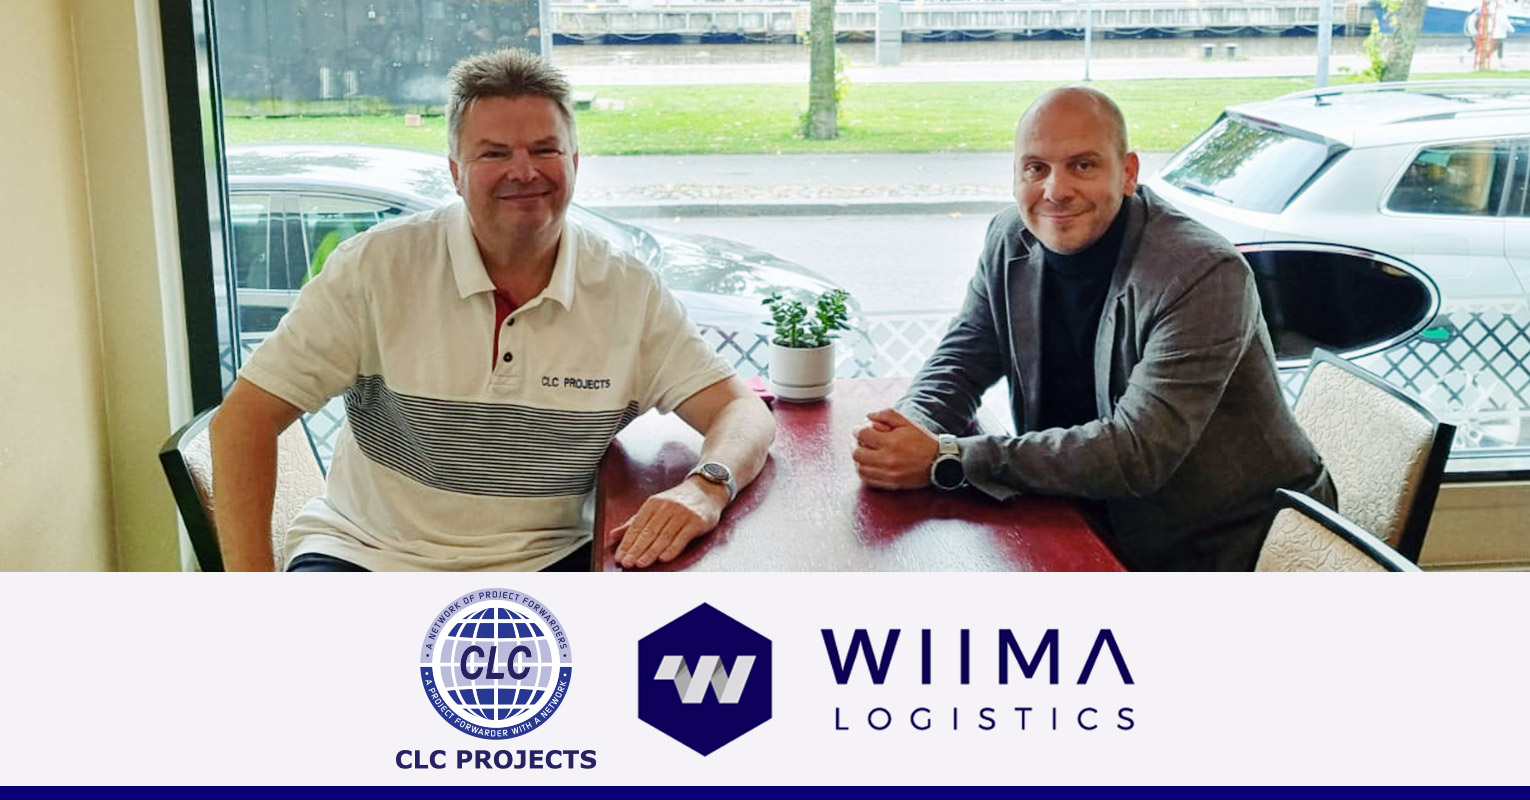 CLC Projects met with the owner of Wiima Logistics (network member and 4PL company) in Turku Finland